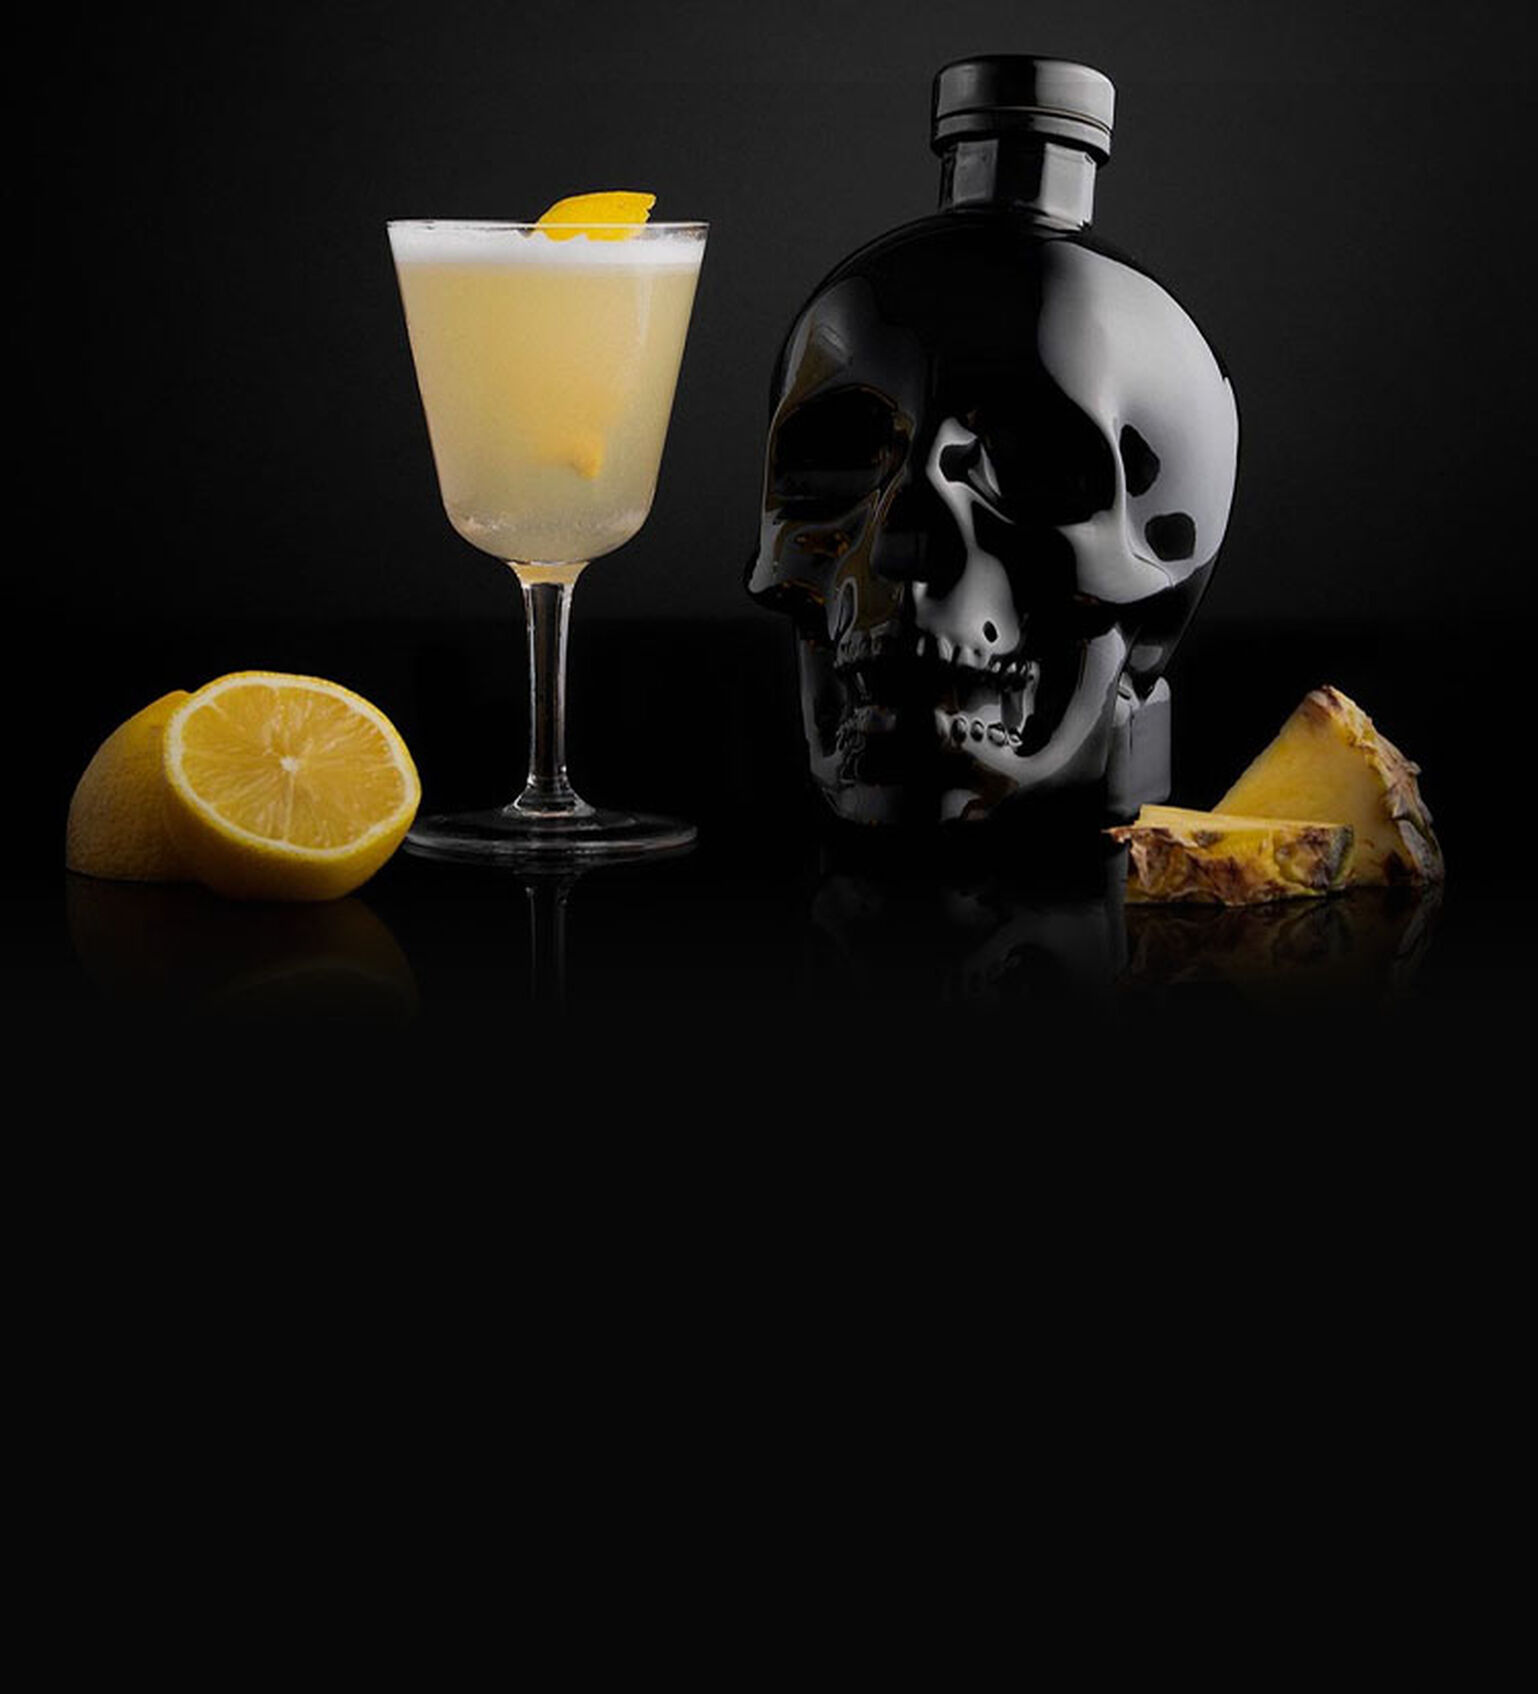 Image of a Crystal Head Onyx Vodka cocktail on a black mirrored surface